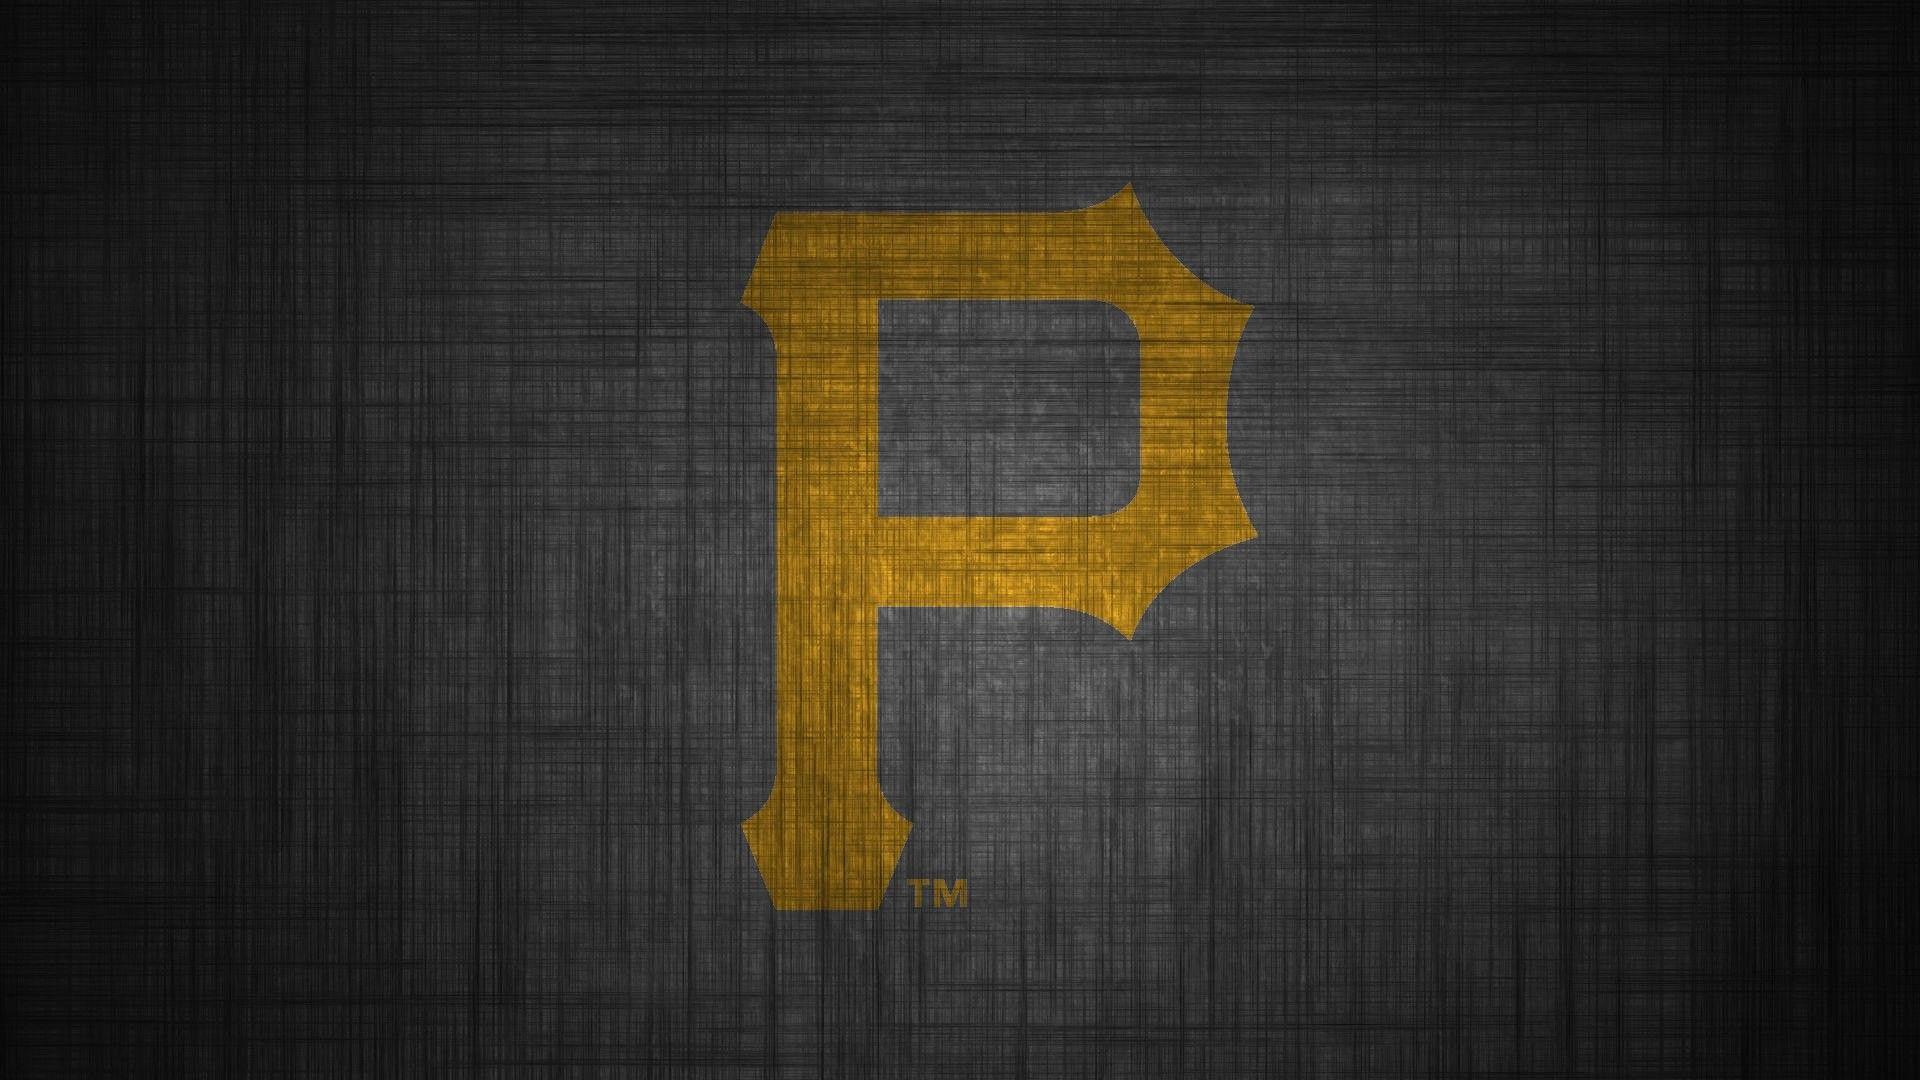 pittsburgh pirates mobile wallpaper (50+ images) on pittsburgh pirates wallpapers